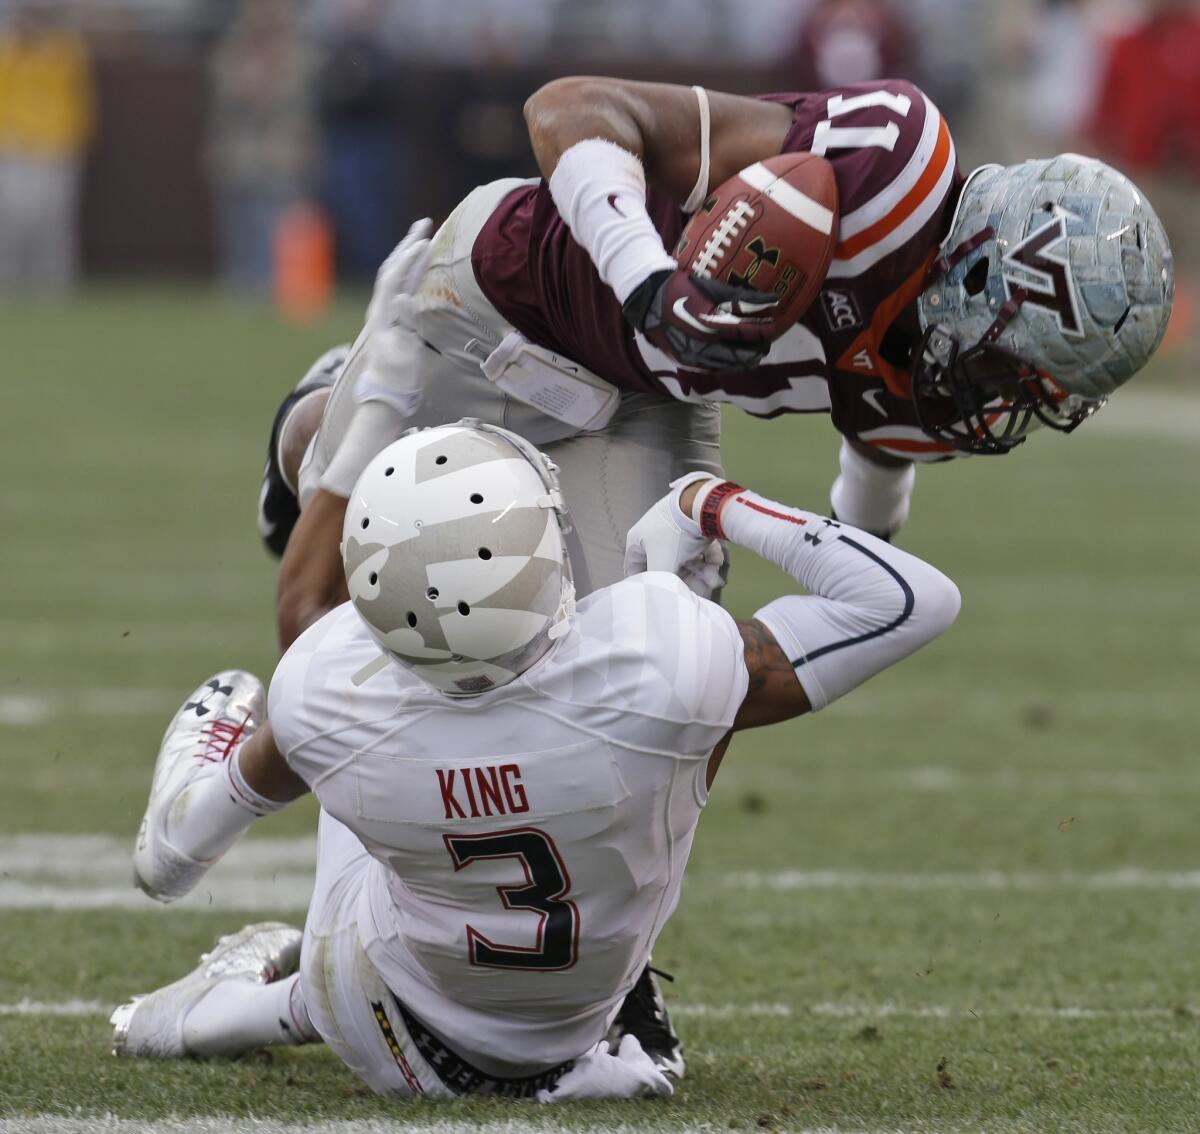 Virginia Tech cornerback Kendall Fuller, top, recovers a fumble by Maryland wide receiver Nigel King during the Hokies' 27-24 overtime loss on Nov. 16.